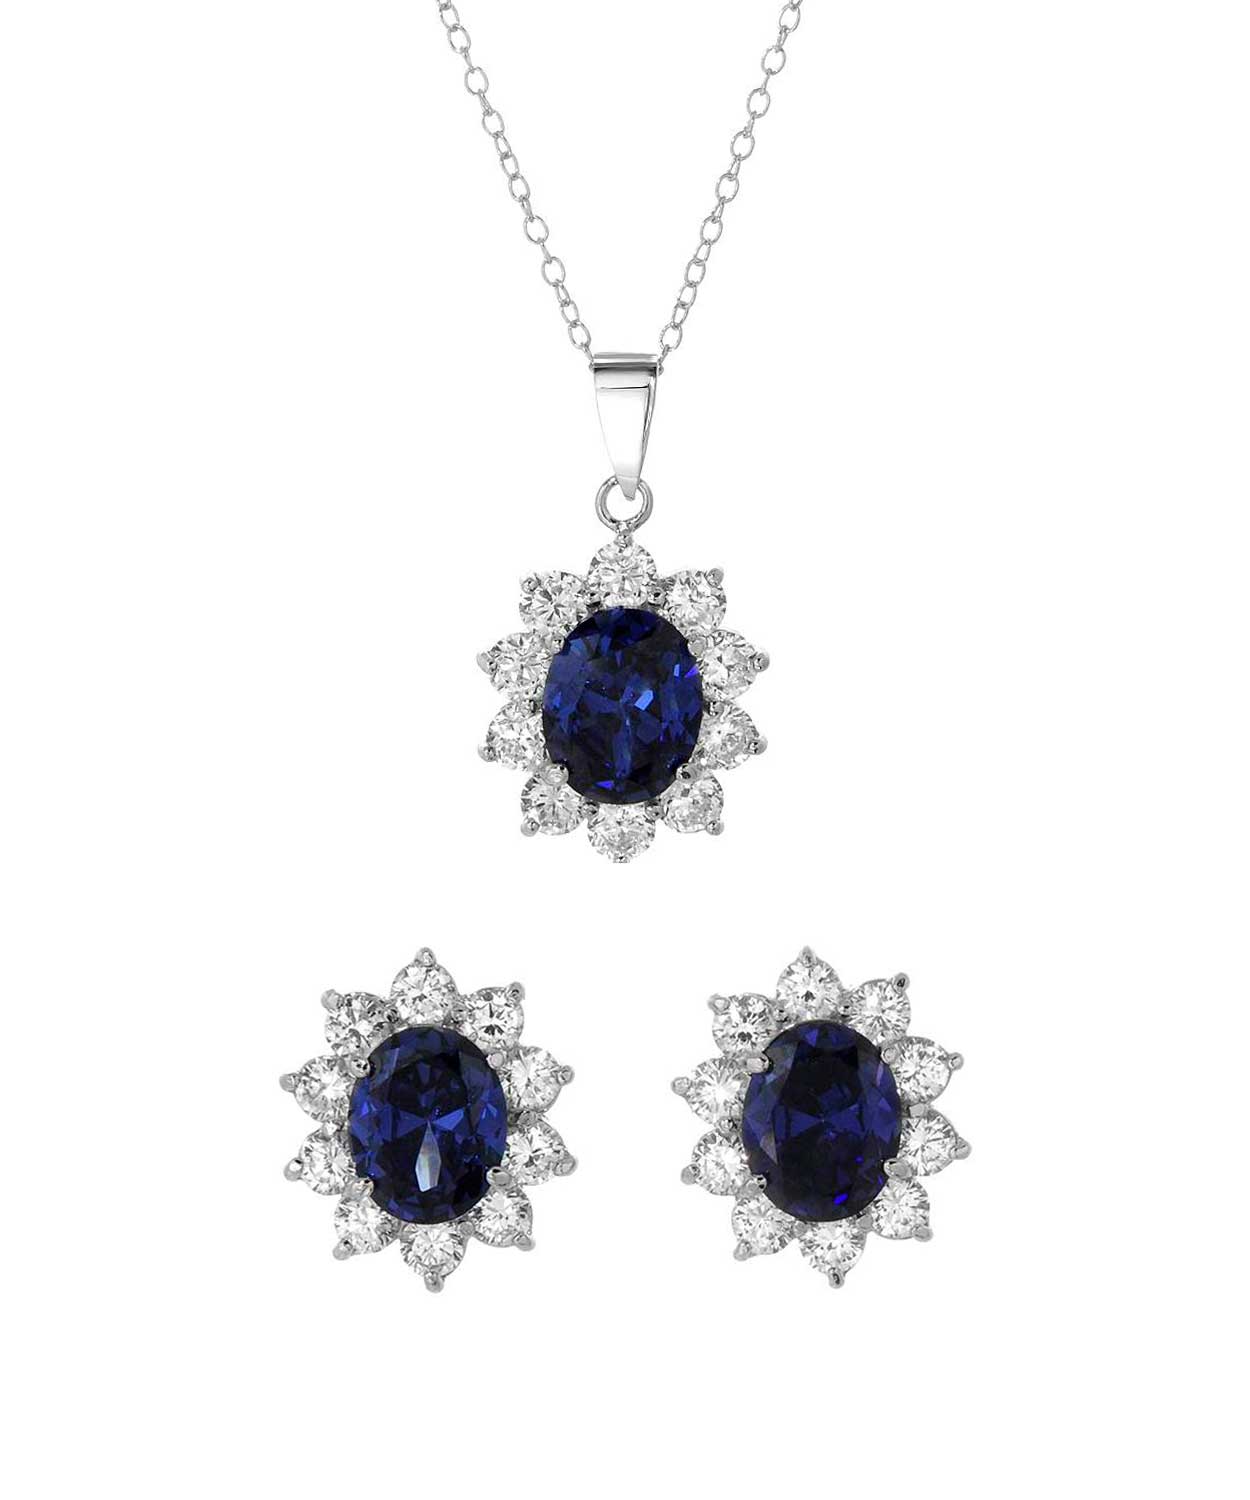 Simulated Royal Blue Sapphire and Brilliant Cut Cubic Zirconia Rhodium Plated 925 Sterling Silver Flower Jewelry Set View 1